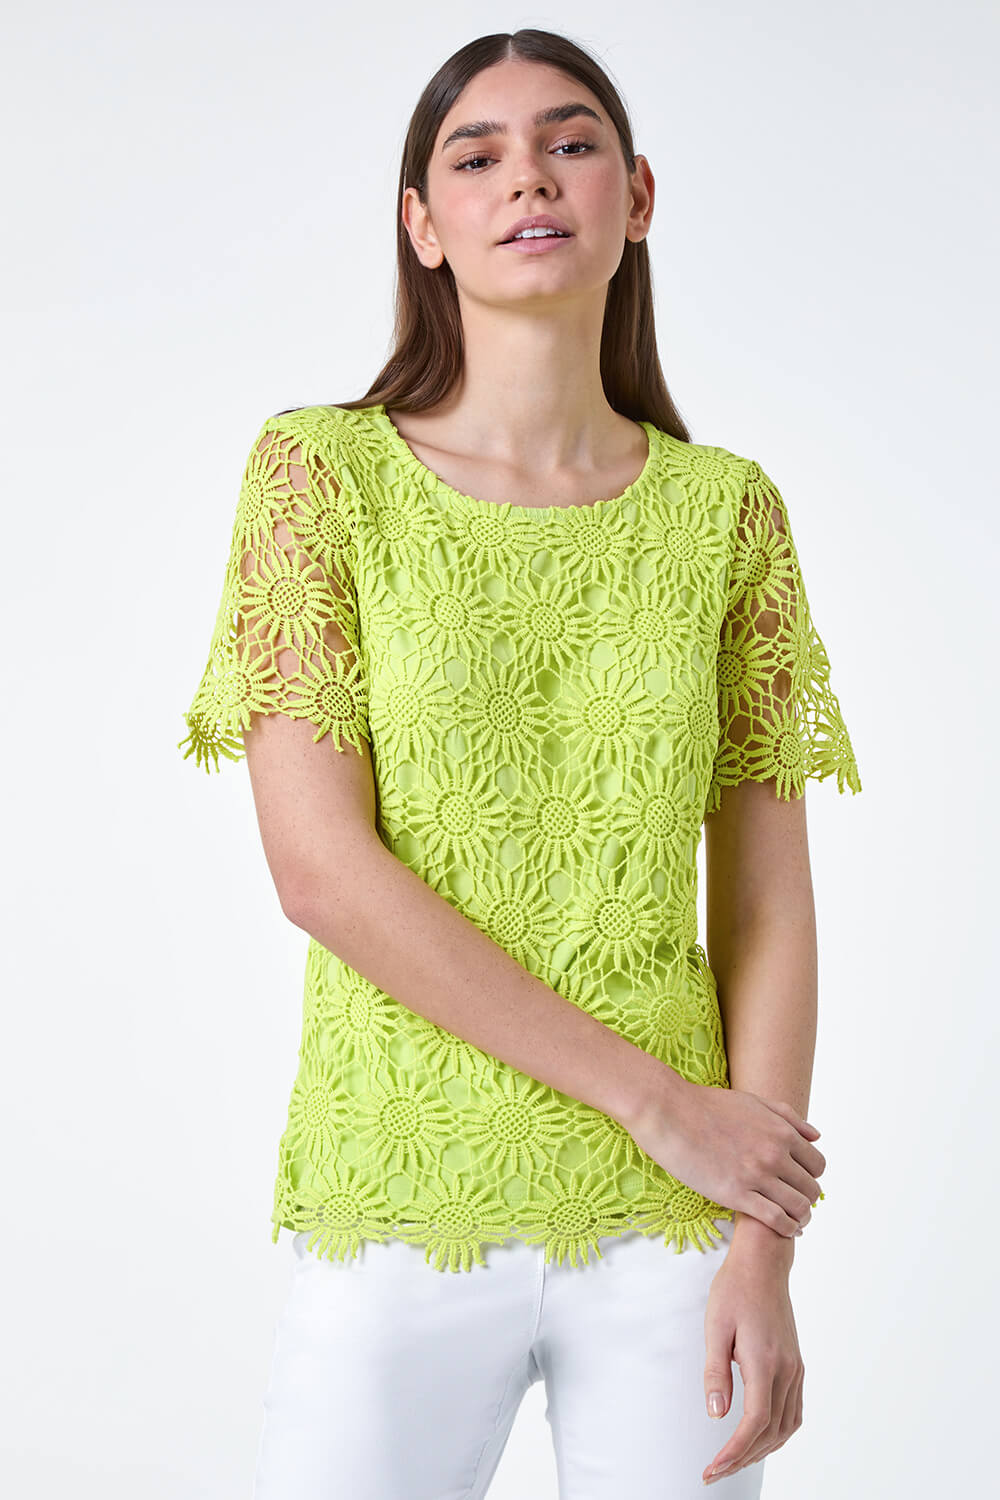 Yellow Floral Lace Stretch Jersey T-Shirt, Image 4 of 5